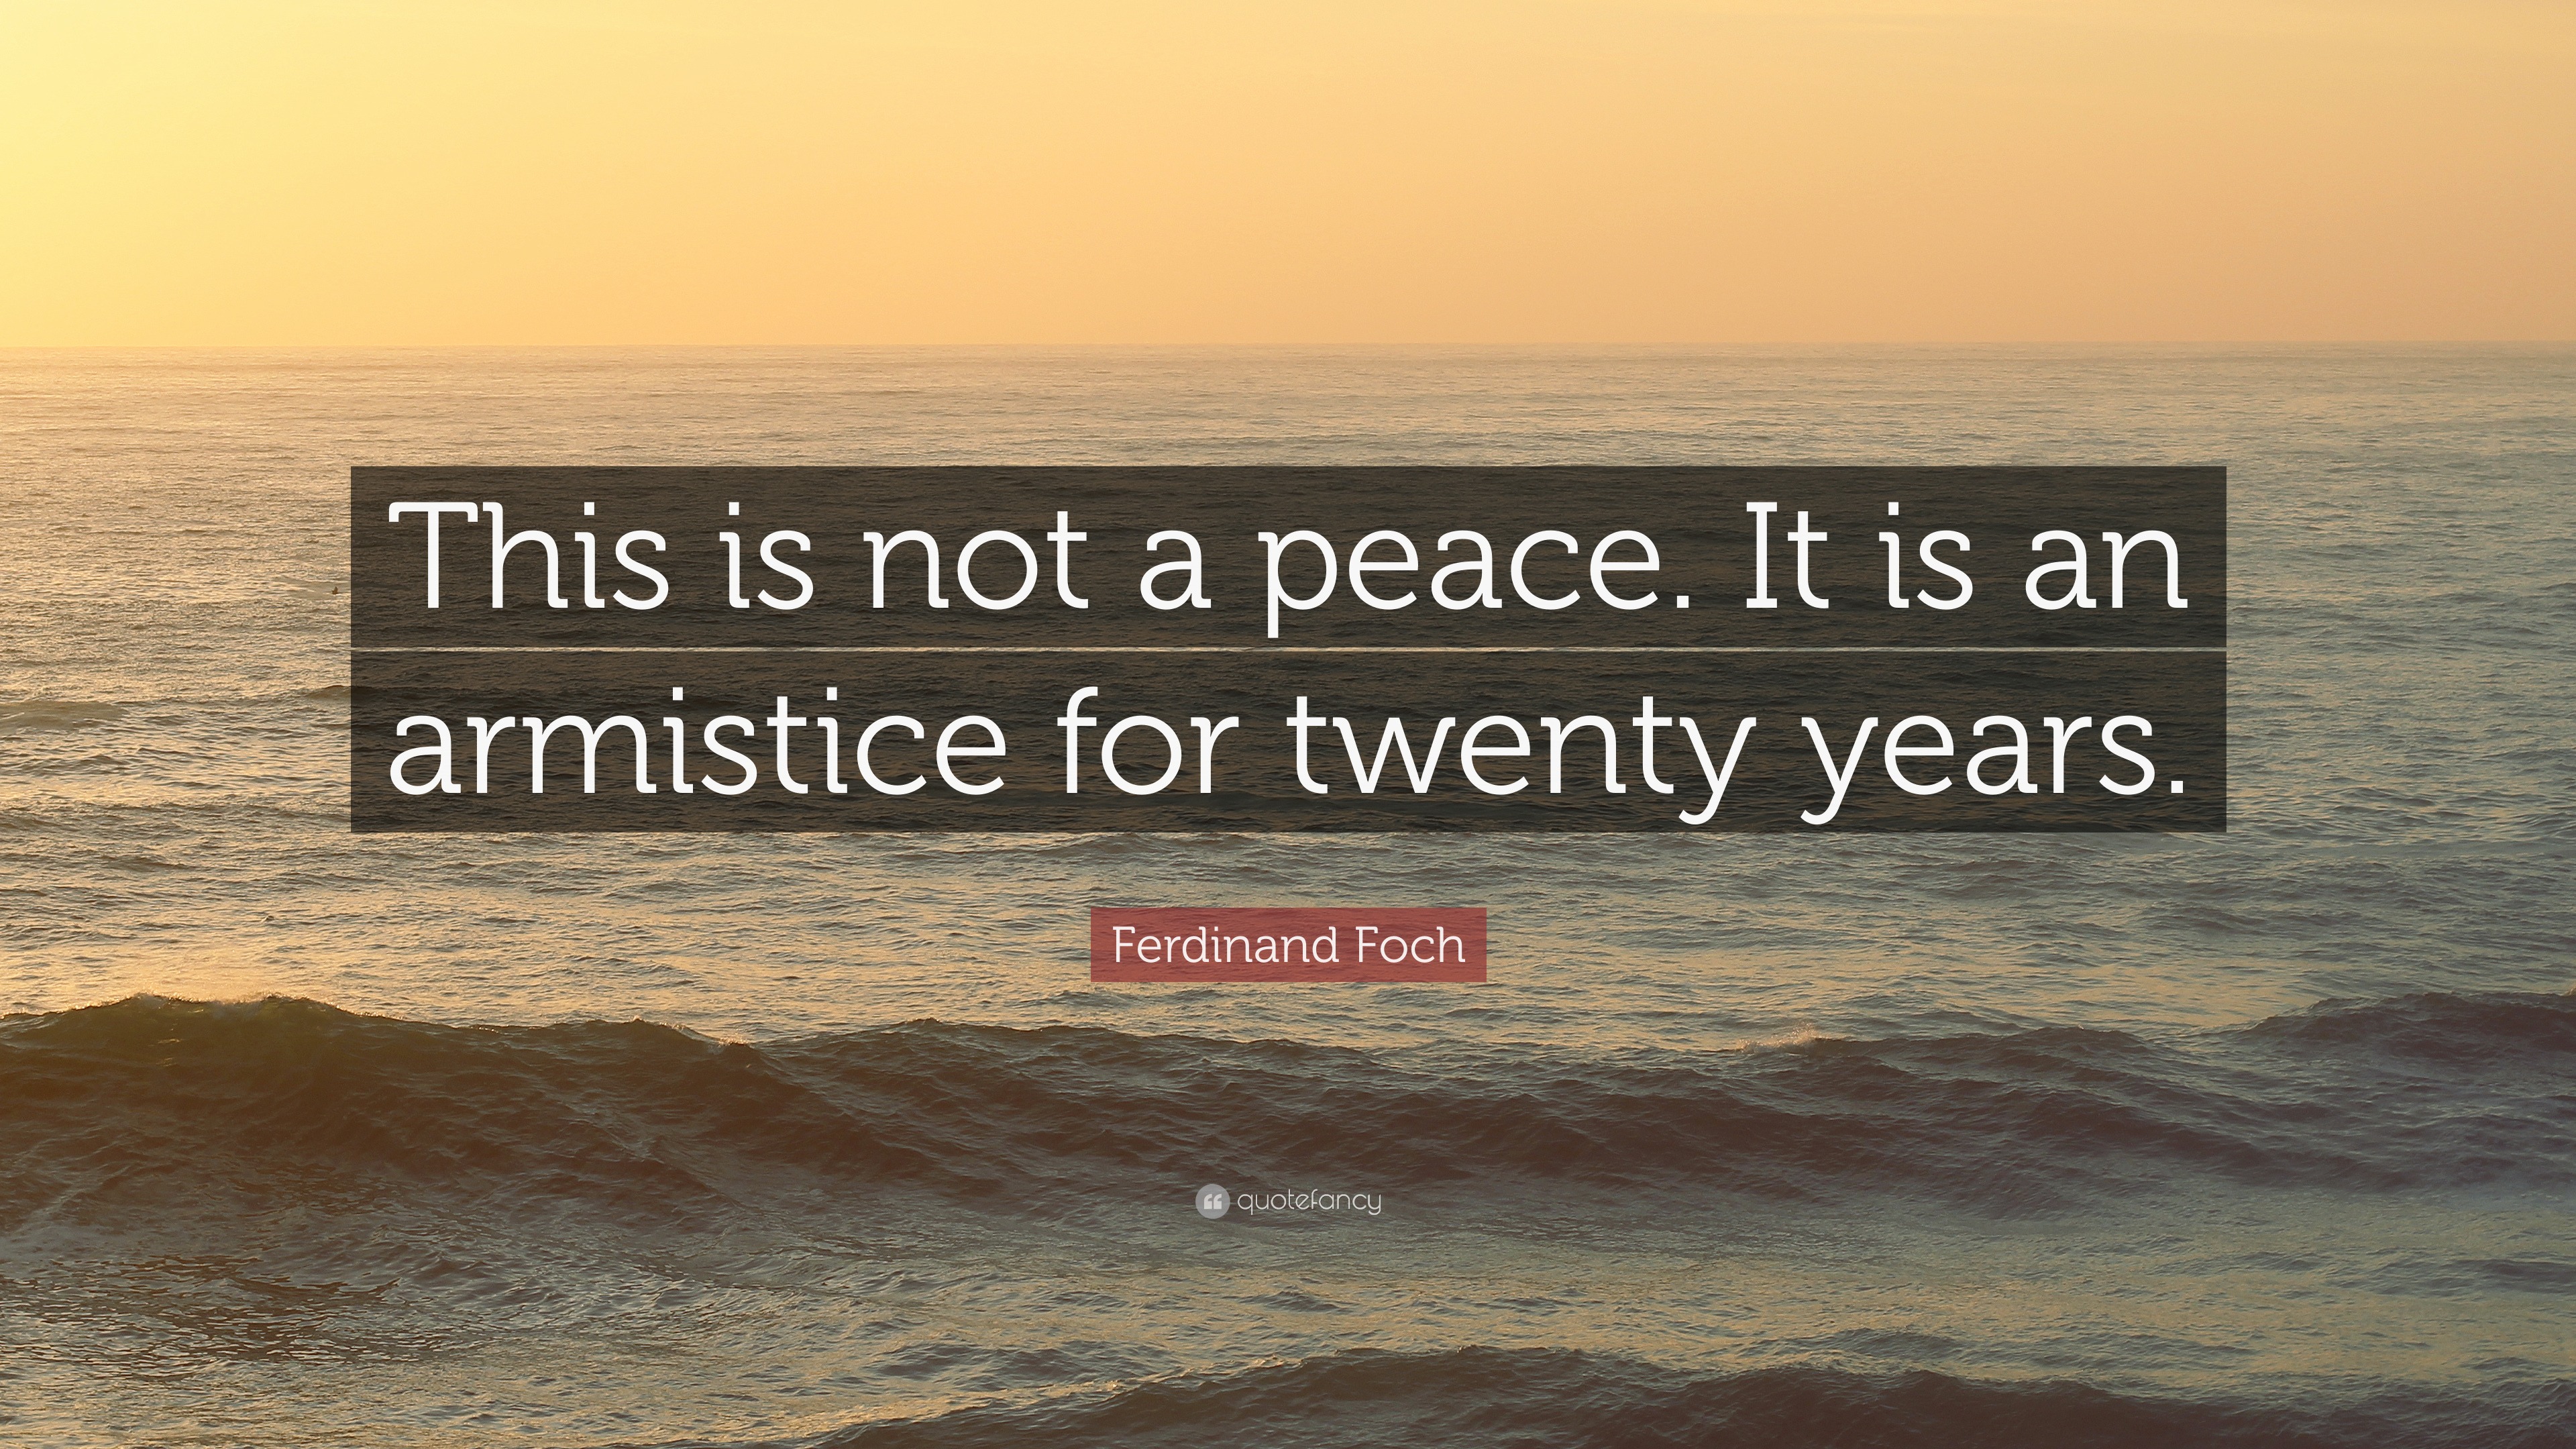 Ferdinand Foch Quote: “This is not a peace. It is an armistice for twenty  years.”